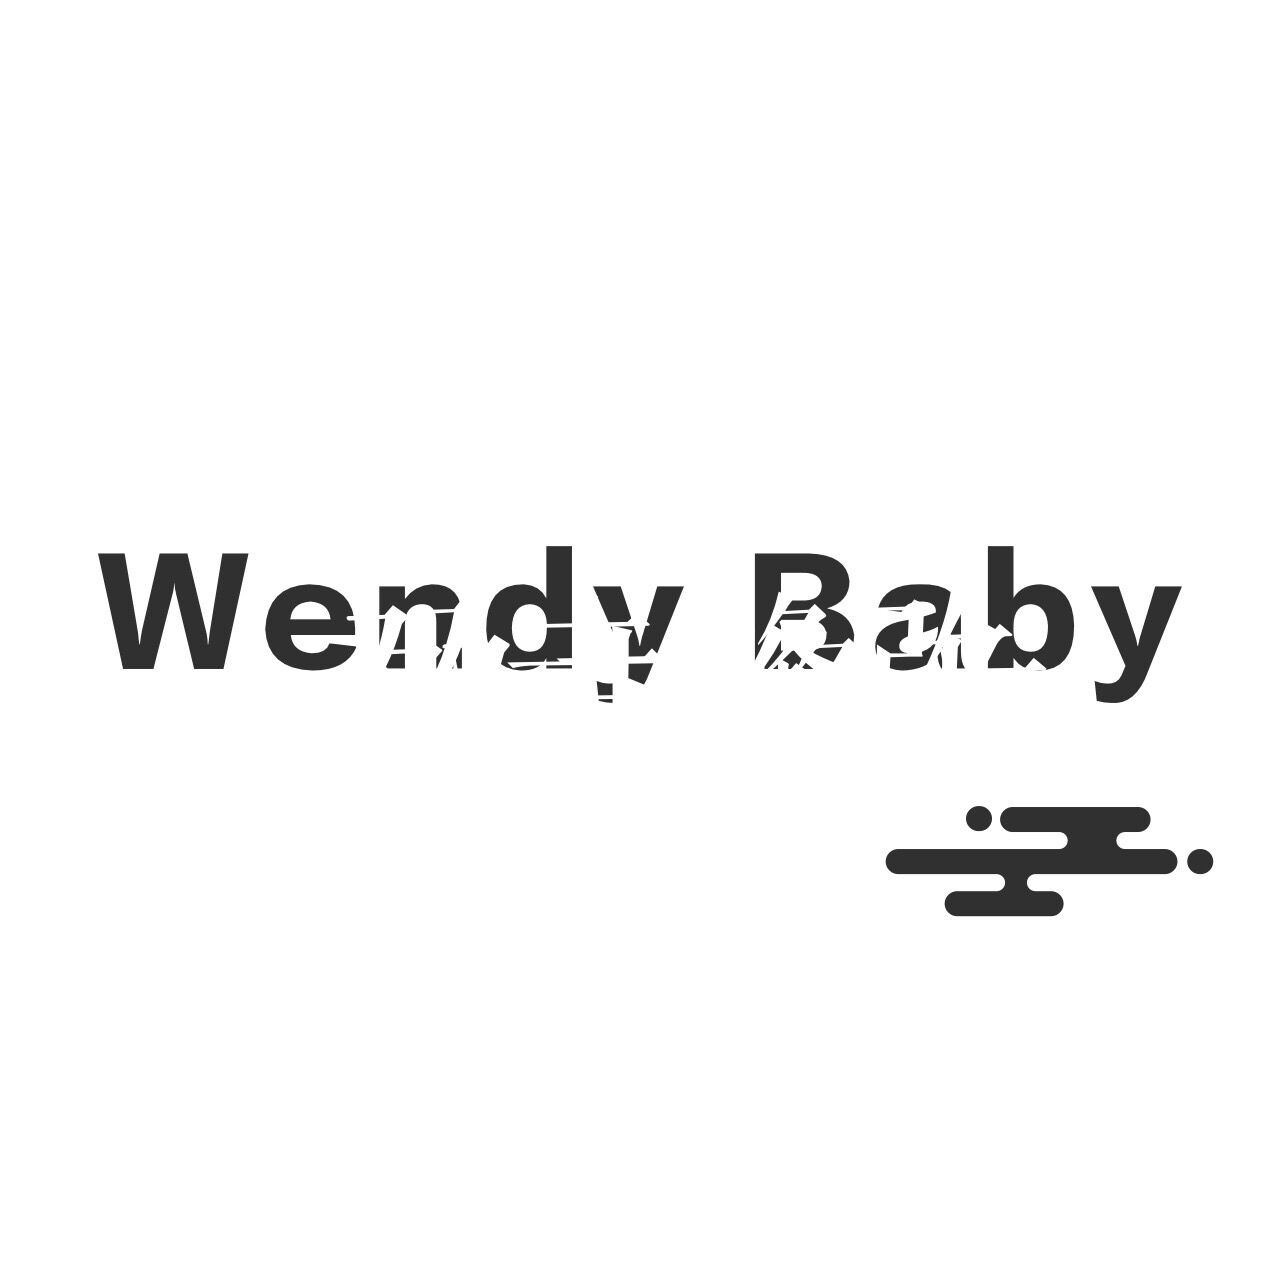 Wendy baby